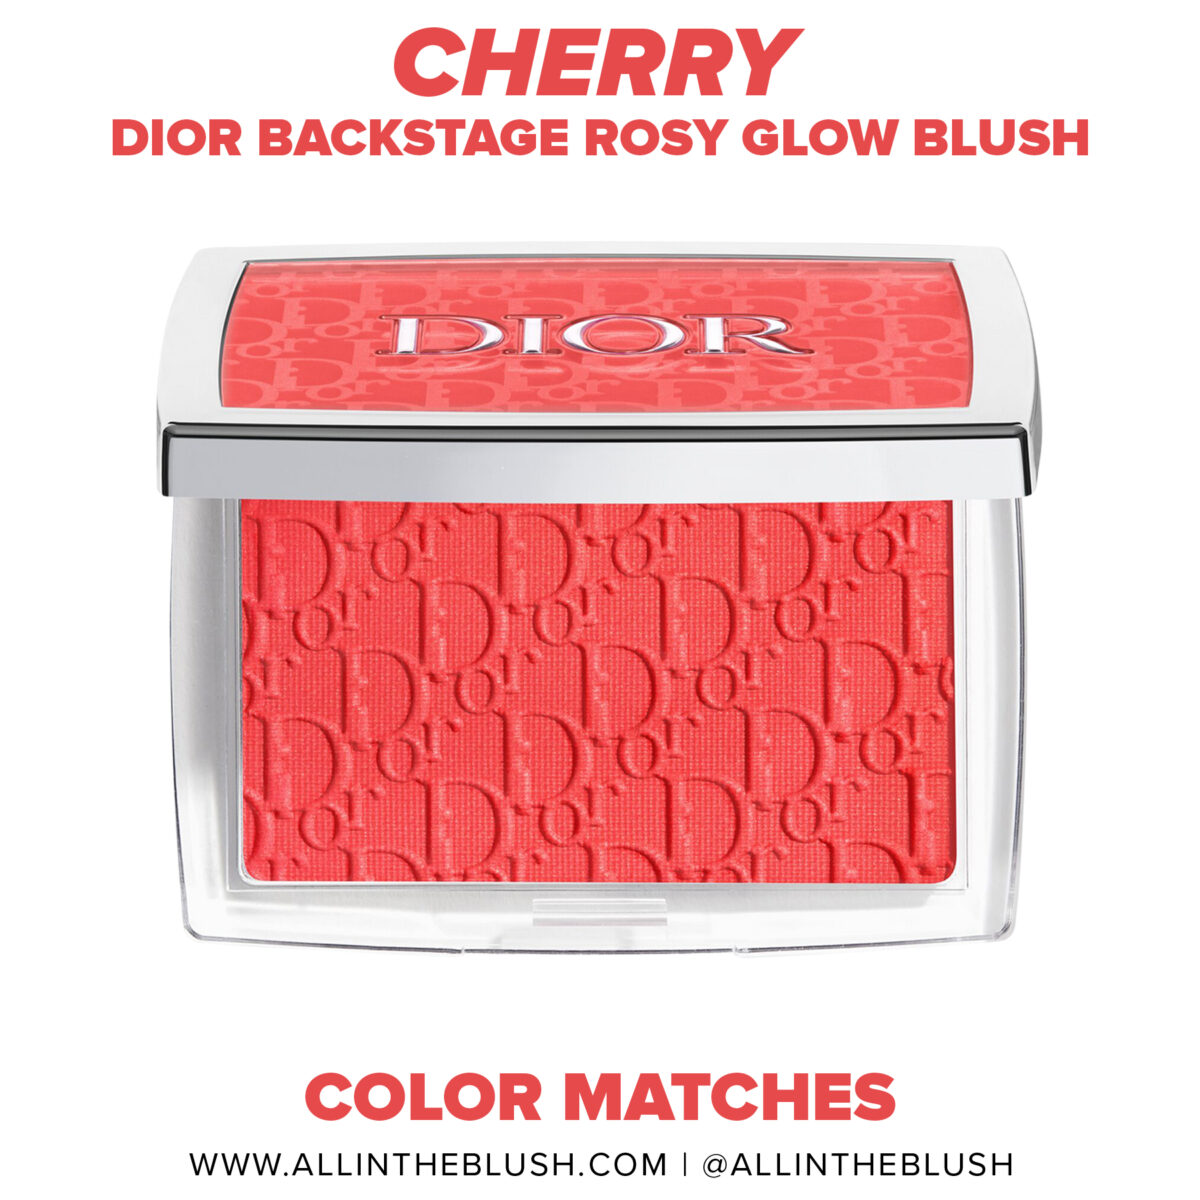 Dior Cherry Backstage Rosy Glow Blush Dupes